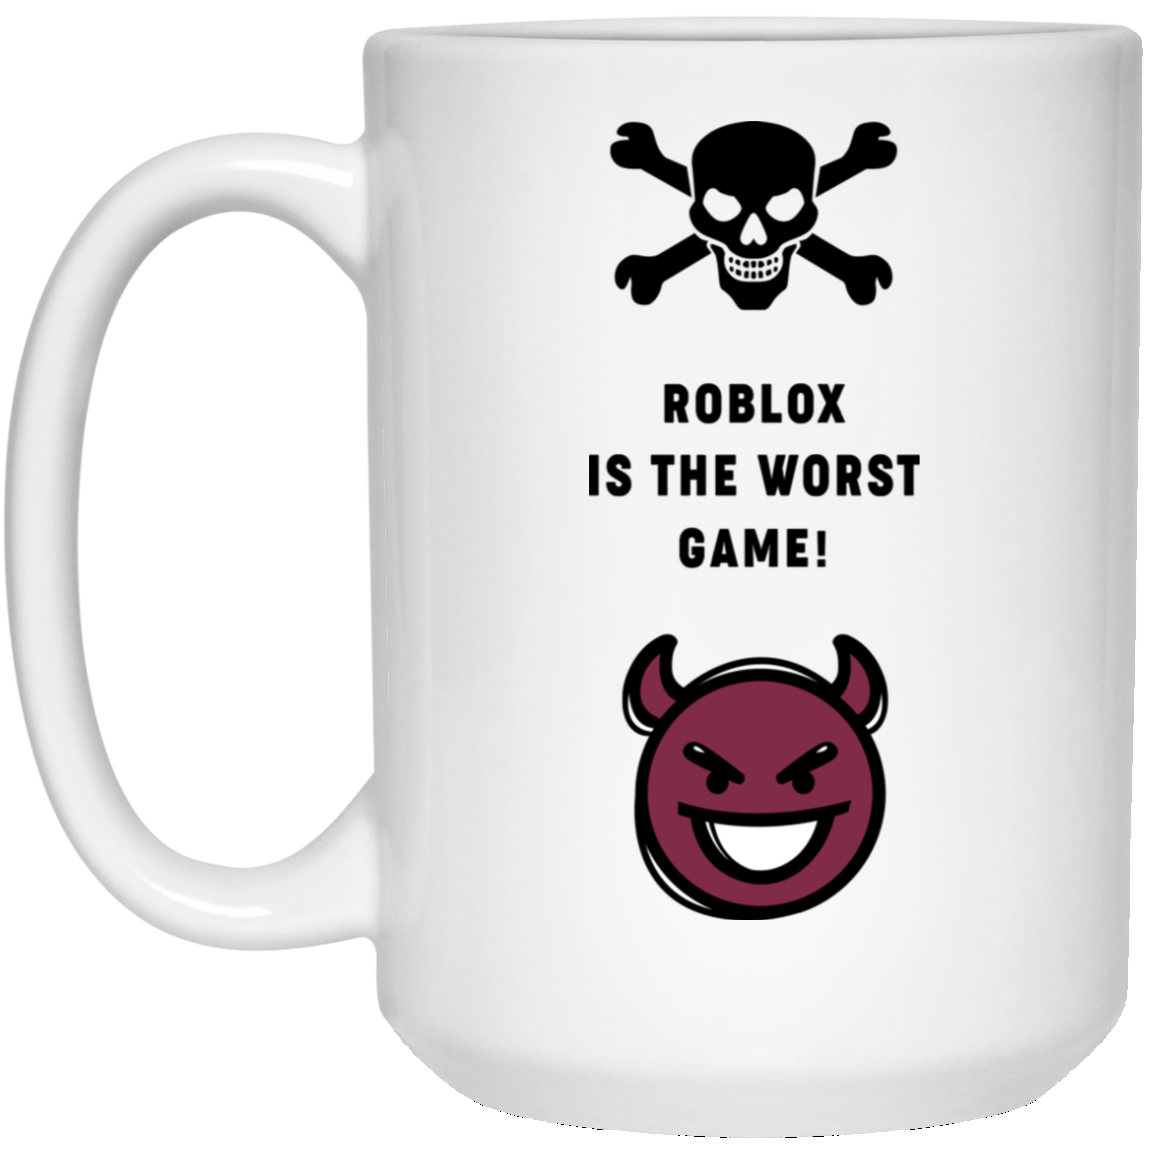 Roblox Is The Worst Game Funny Roblox Mug - is roblox worst game